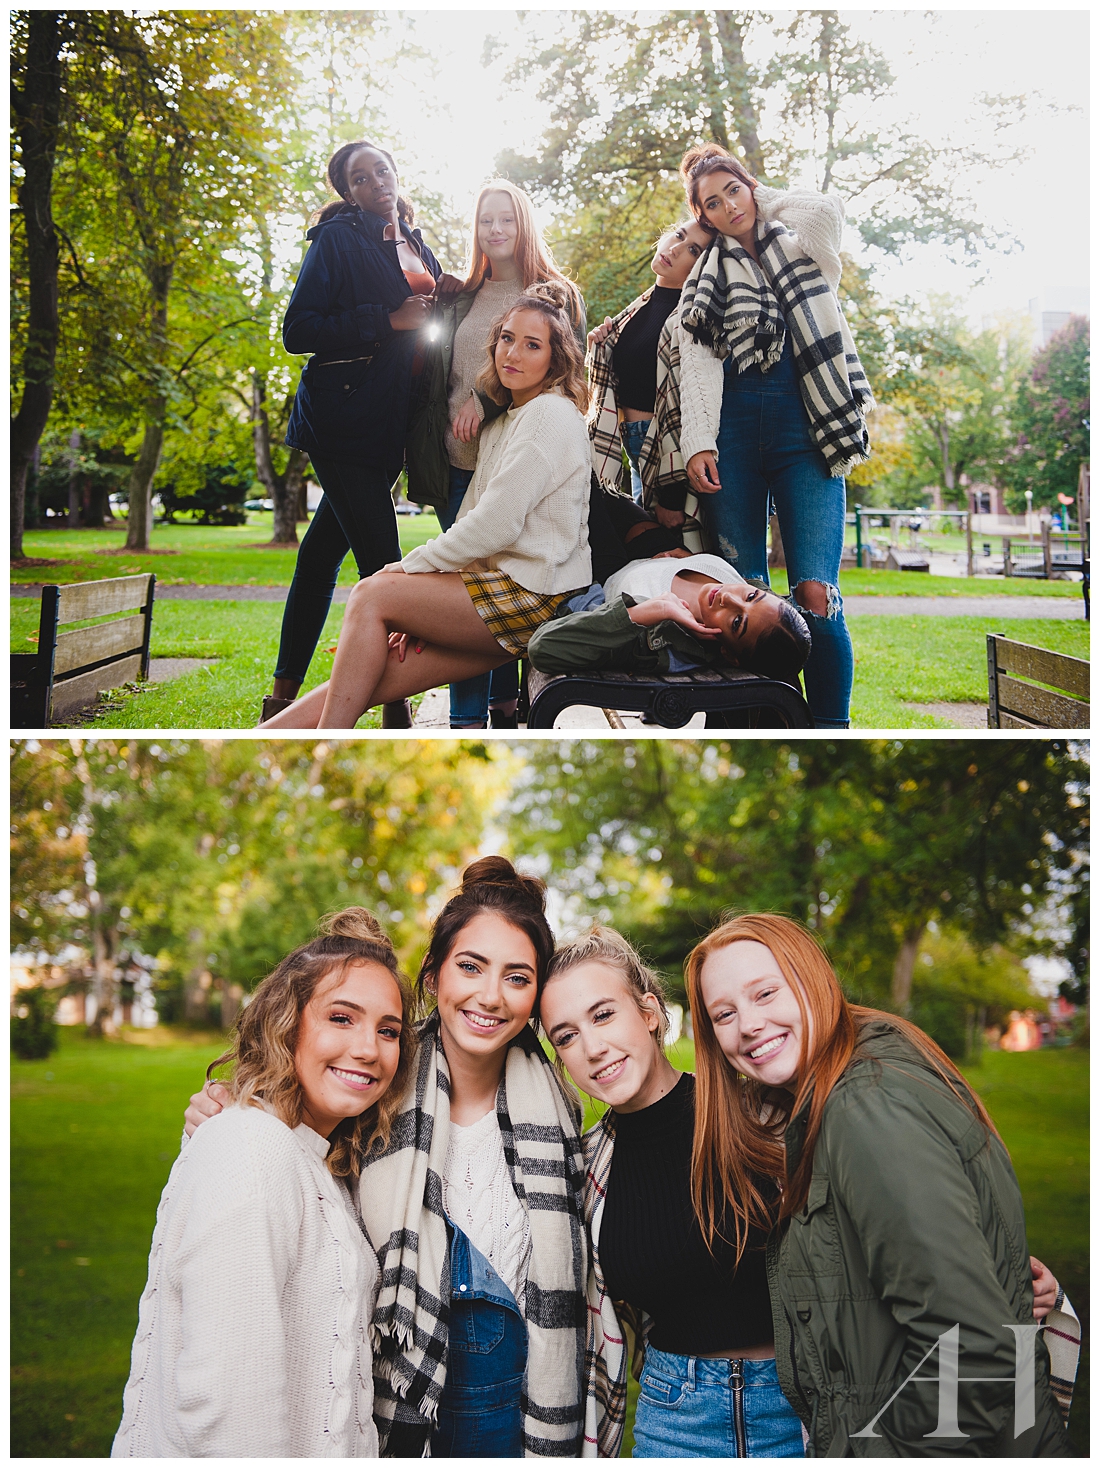 Autumn Senior Portraits of Group of Friends | AHP Model Team photographed by Amanda Howse